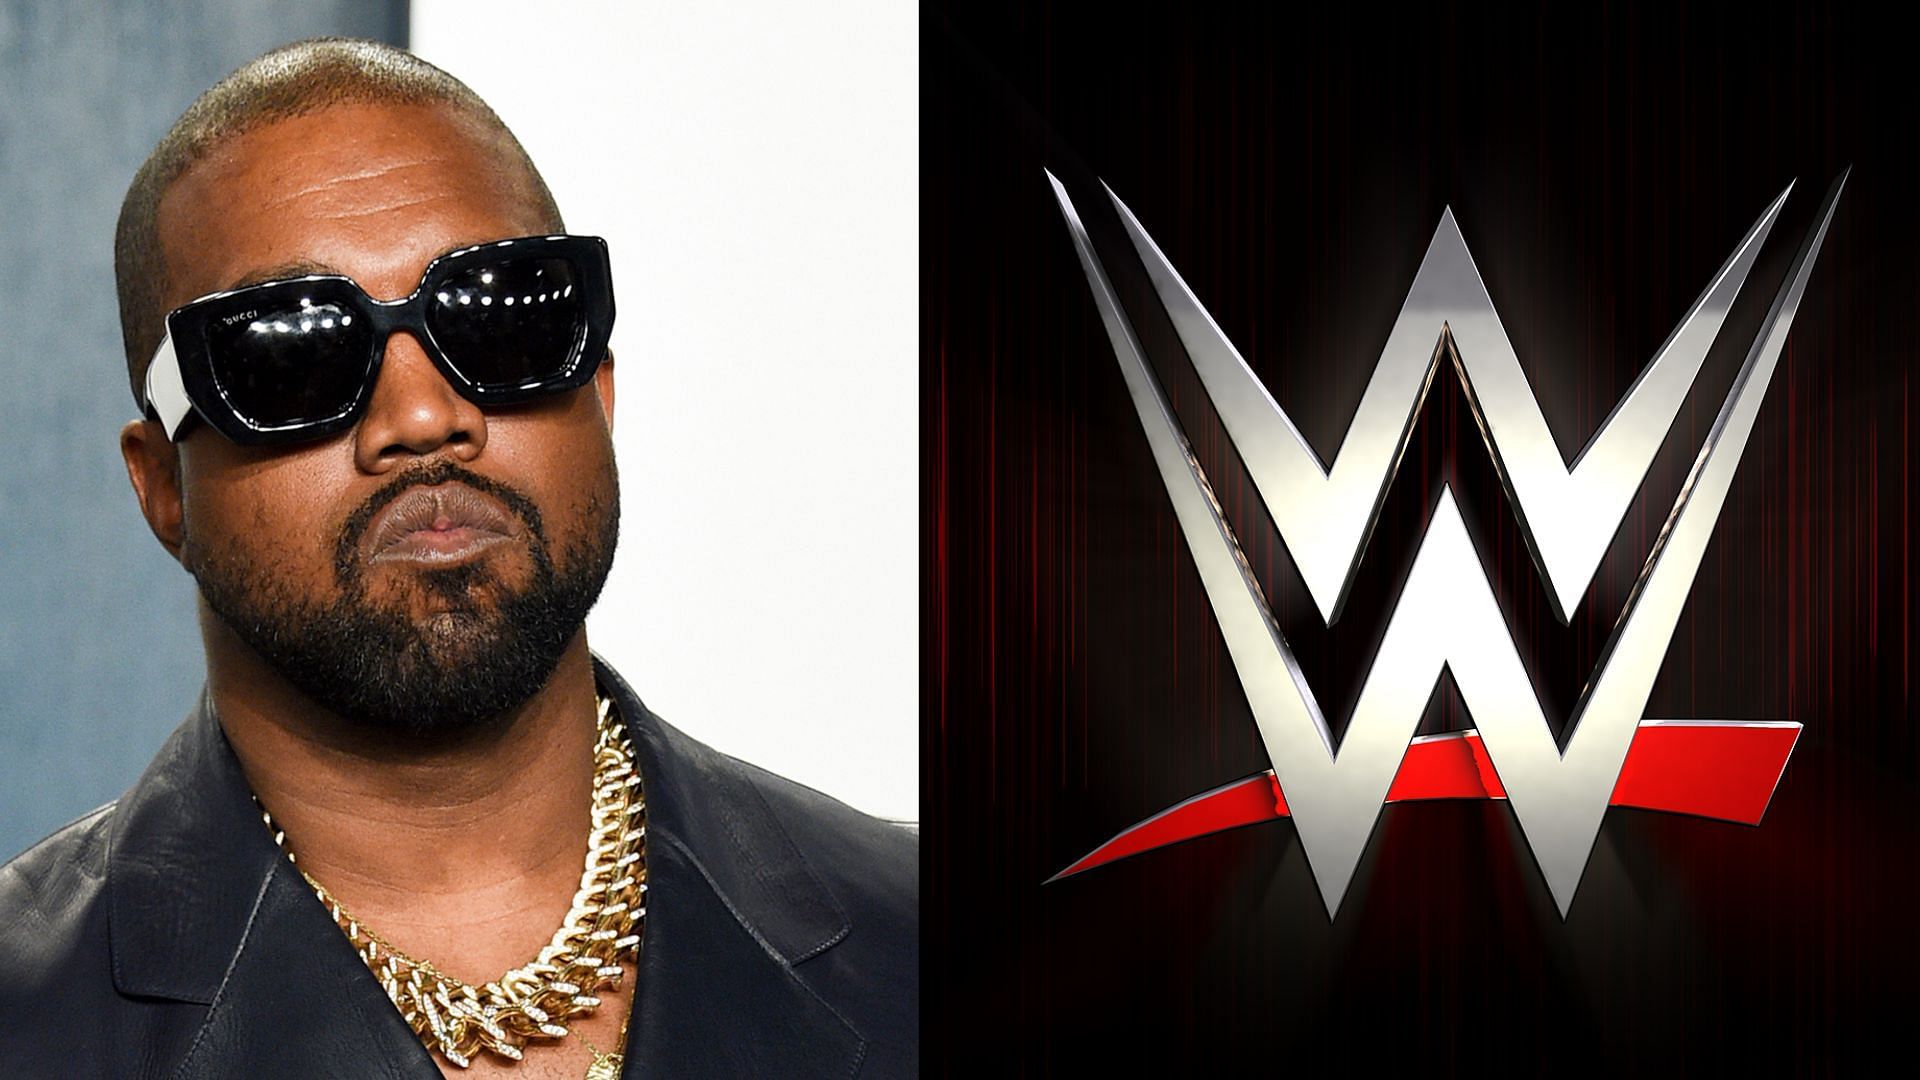 Kanye West was reportedly offered to appear for WWE